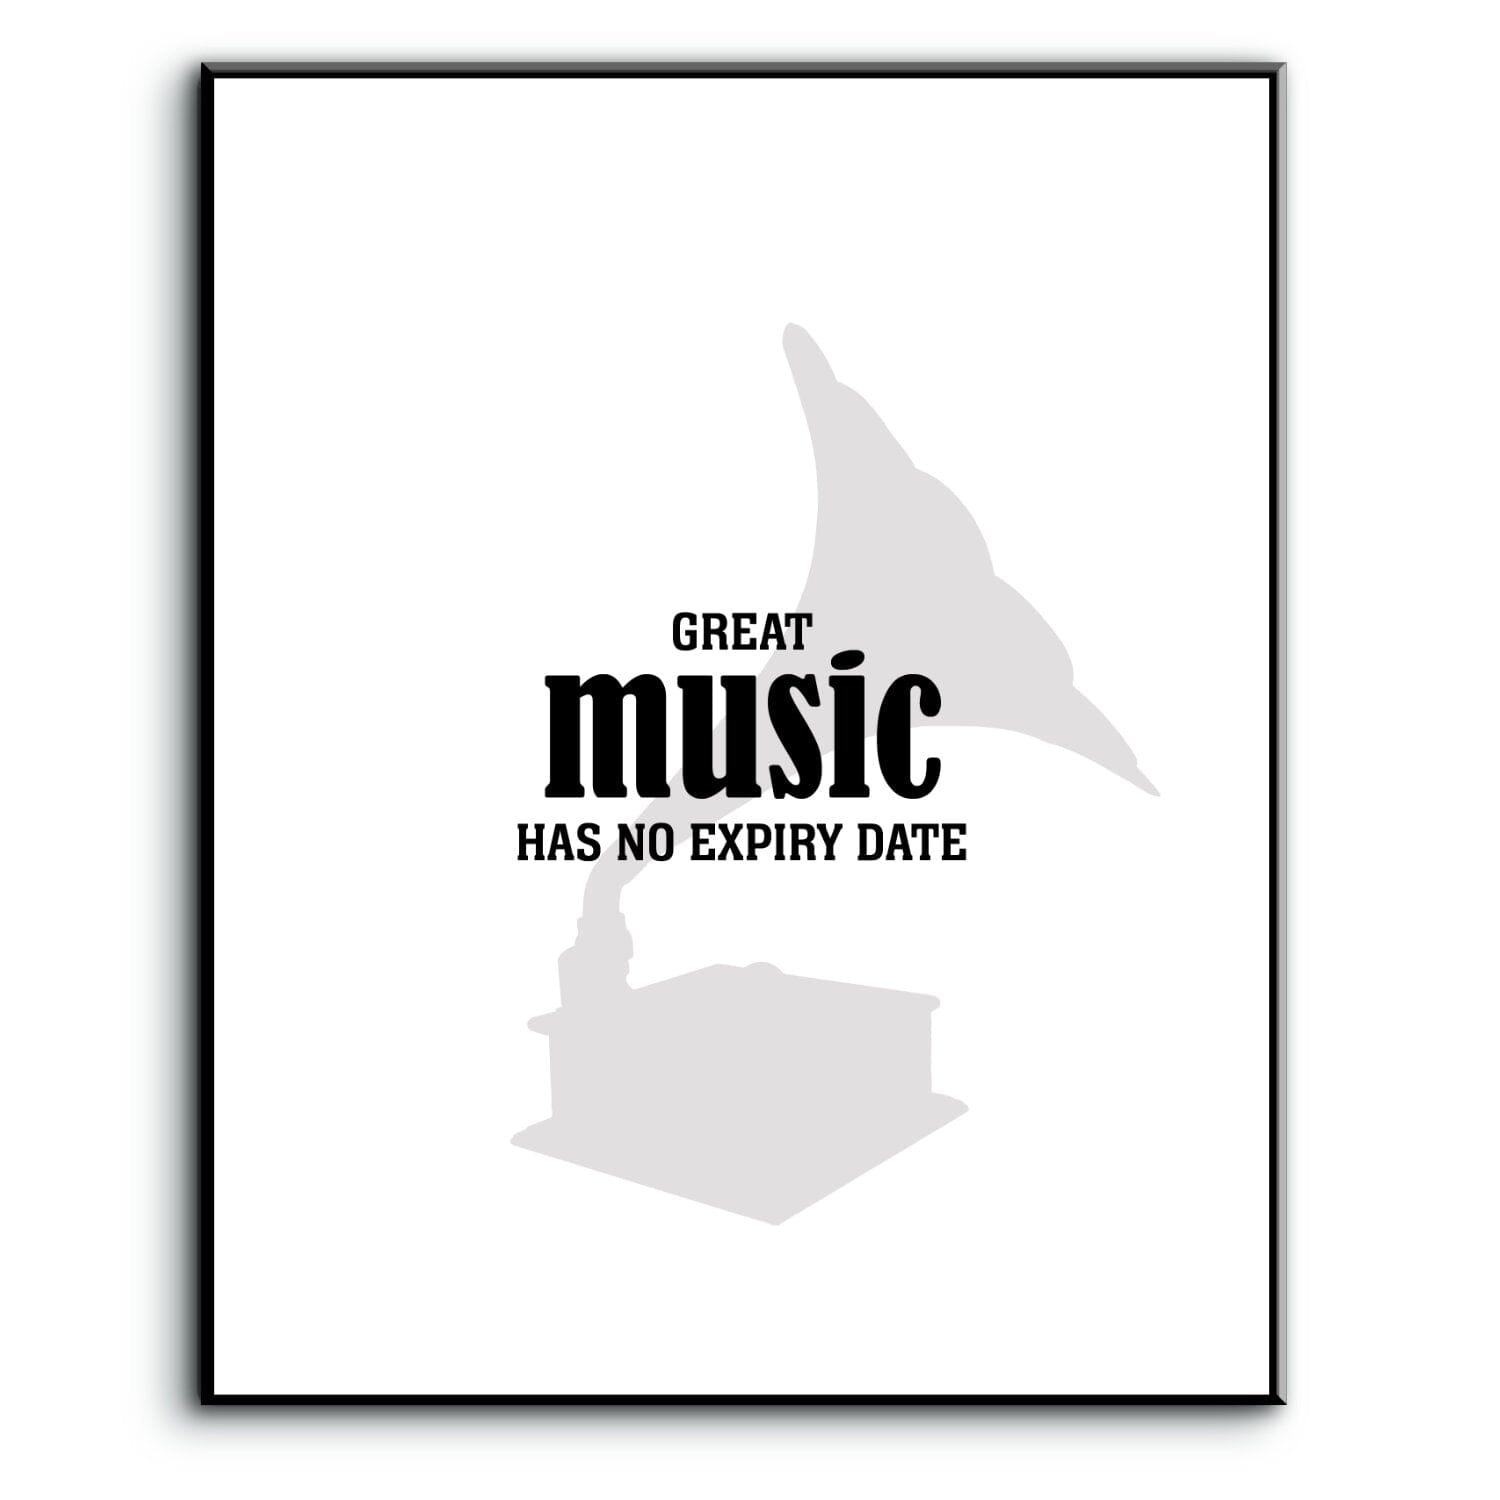 Great Music Has No Expiry Date - Wise and Witty Art Wise and Wiseass Quotes Song Lyrics Art 8x10 Plaque Mount 